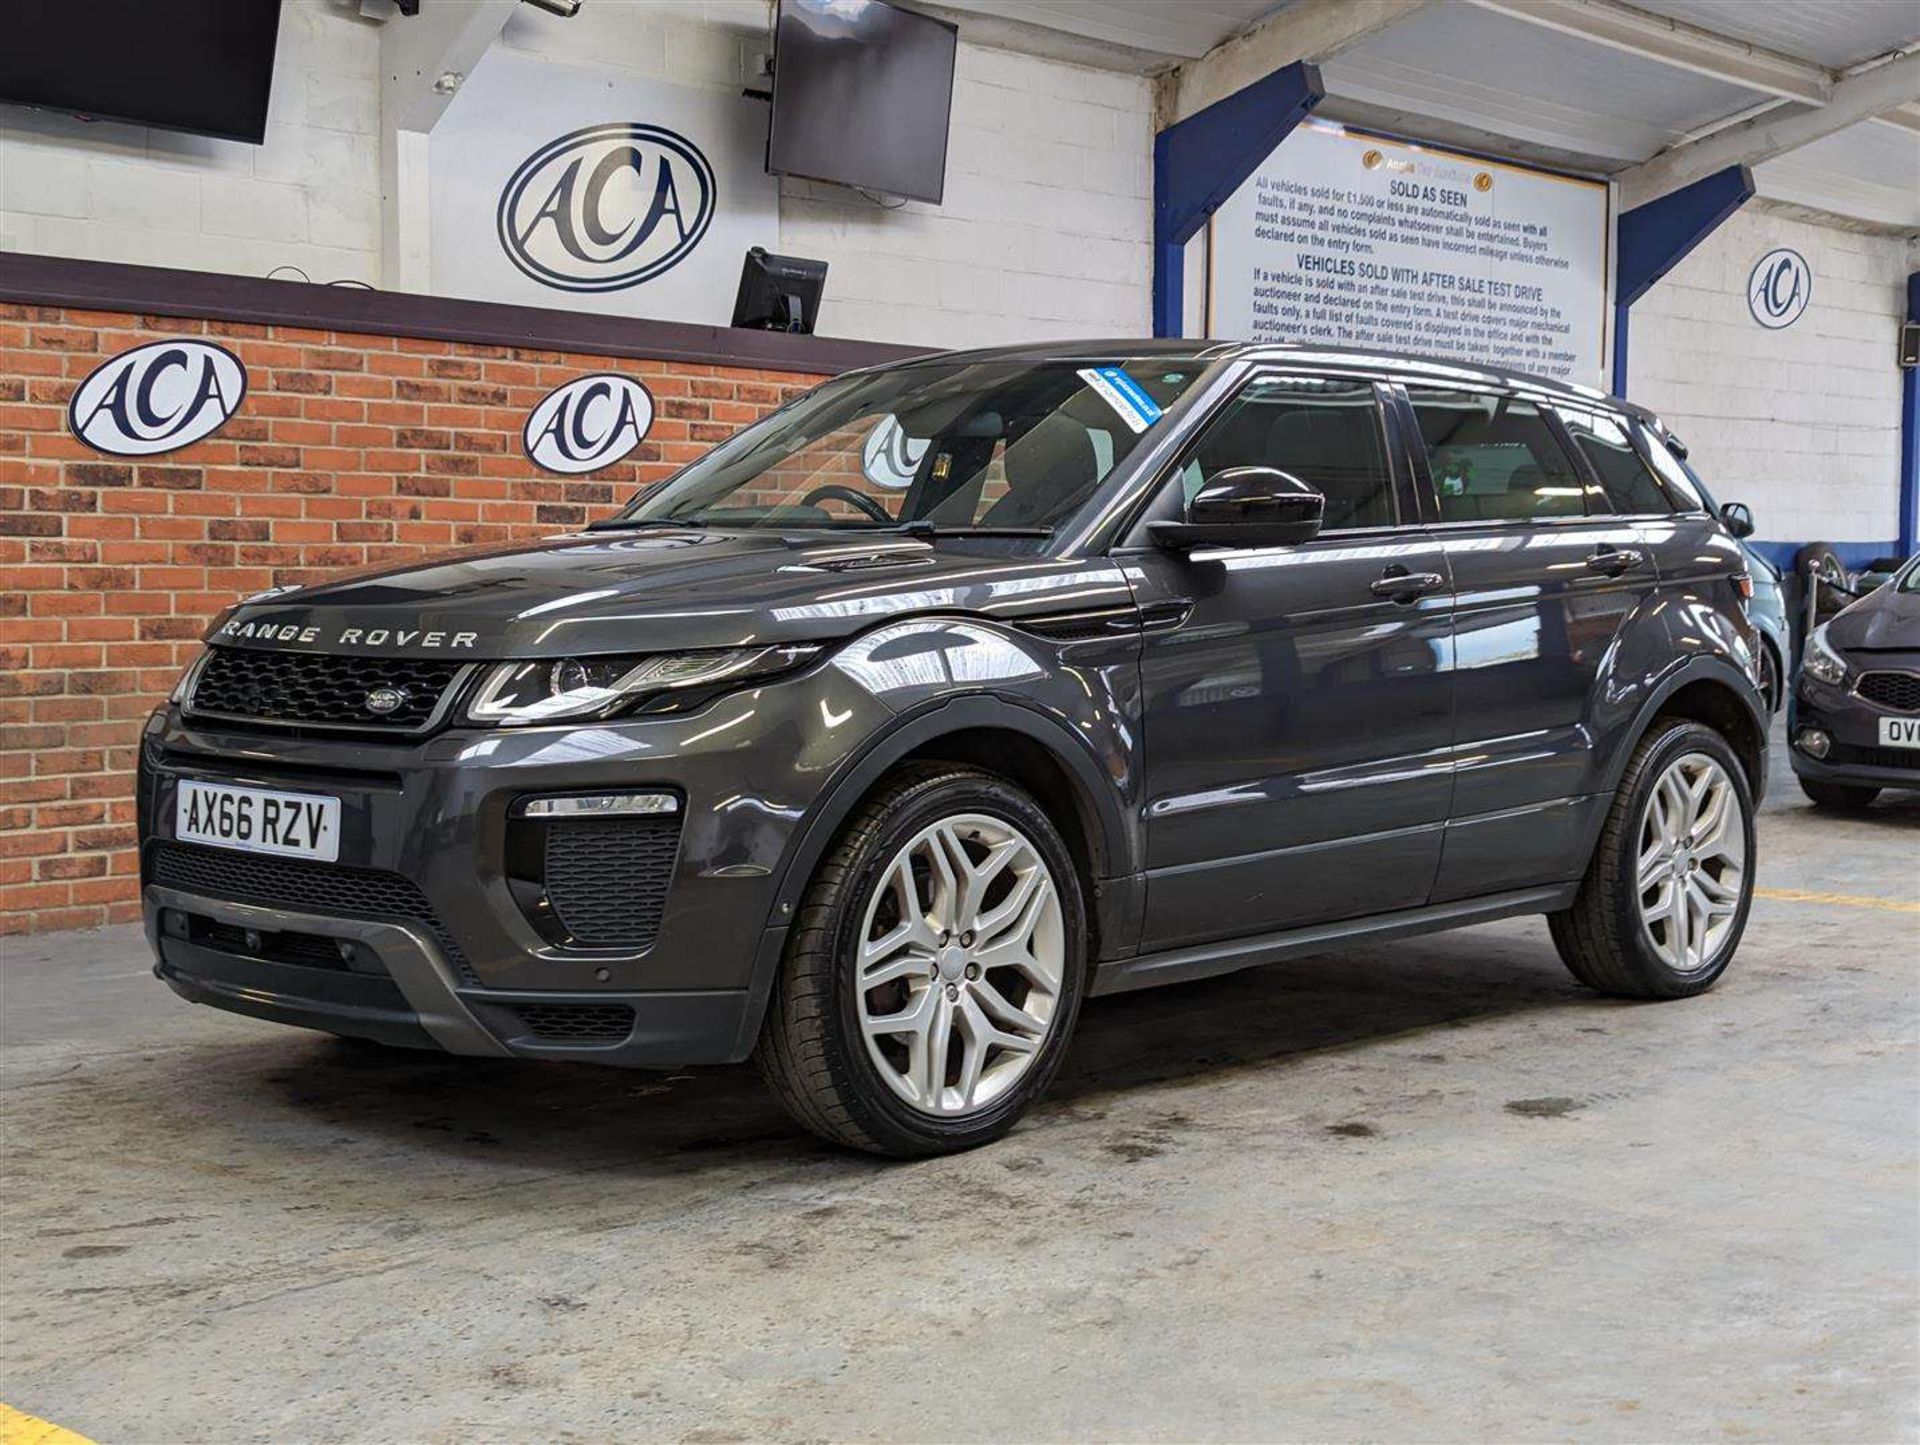 2016 LAND ROVER RROVER EVOQUE HSE DYN LUX